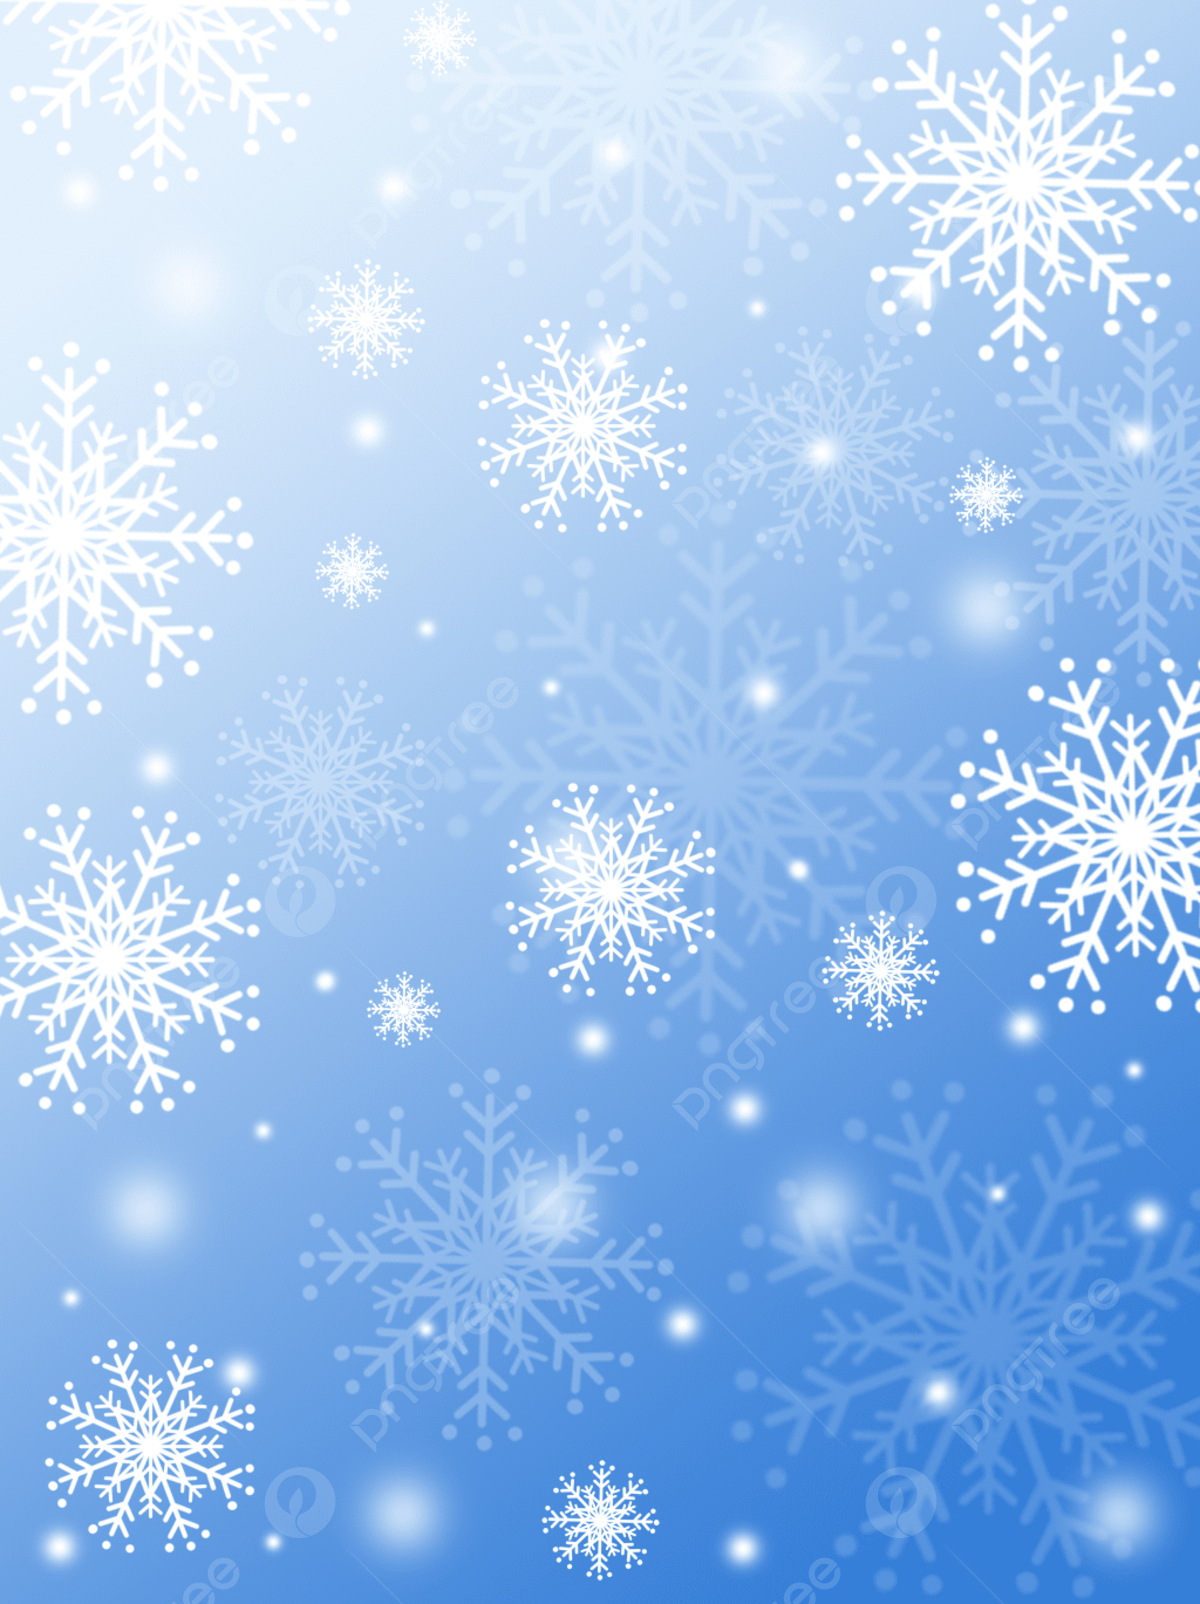 A snowflake background with blue sky - Snowflake, snow, winter